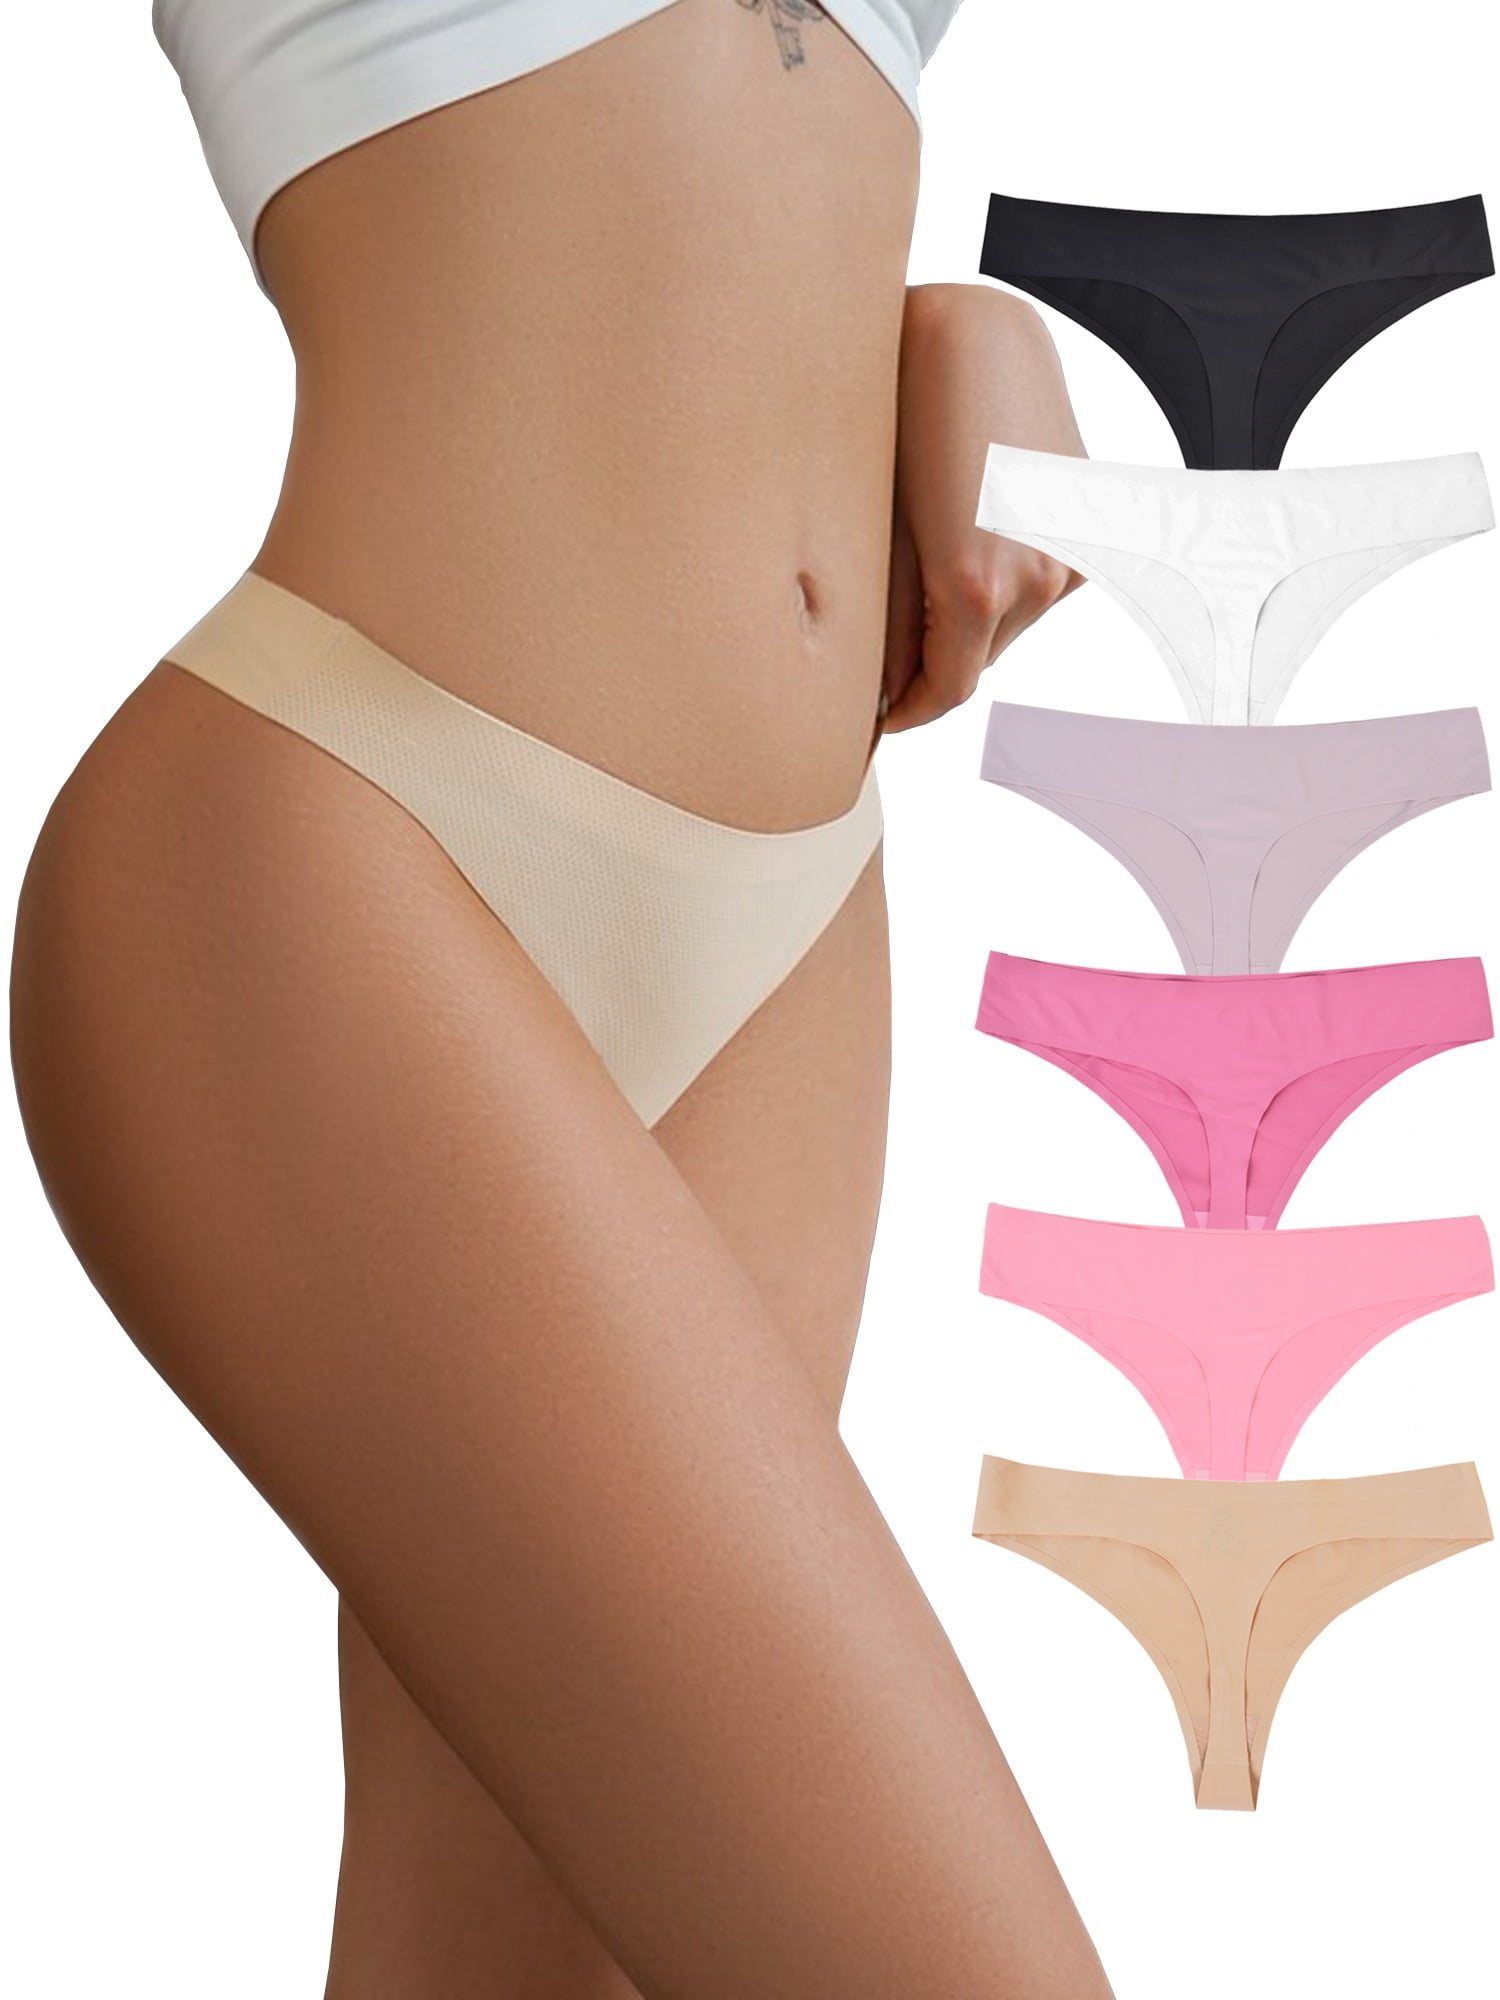 Buankoxy Women's 3 Pack Mid-Rise Stretch Cotton Panties(Nude,9